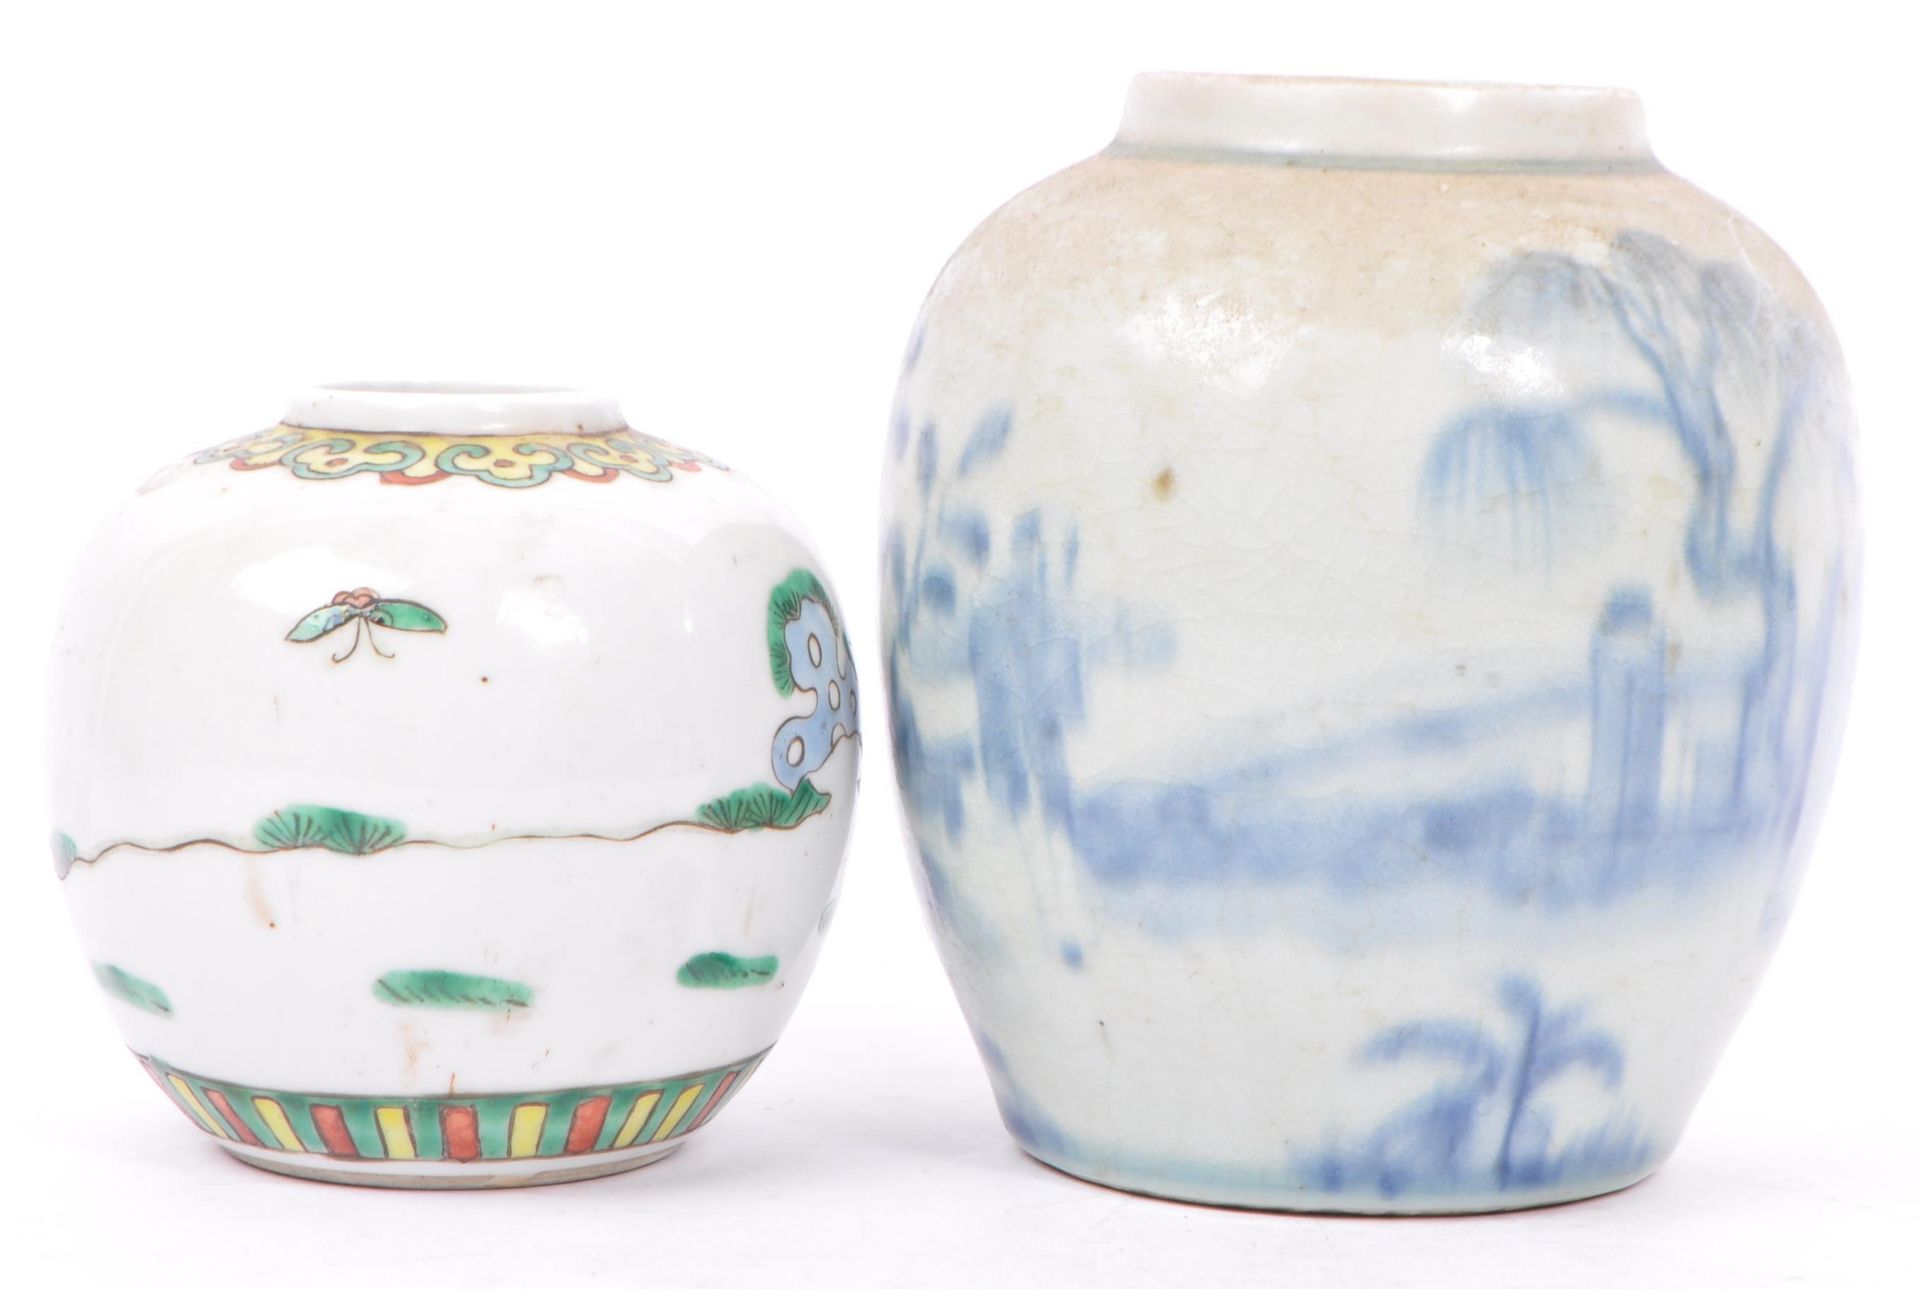 COLLECTION OF 19TH CENTURY CHINESE PORCELAIN GINGER JARS - Image 6 of 8